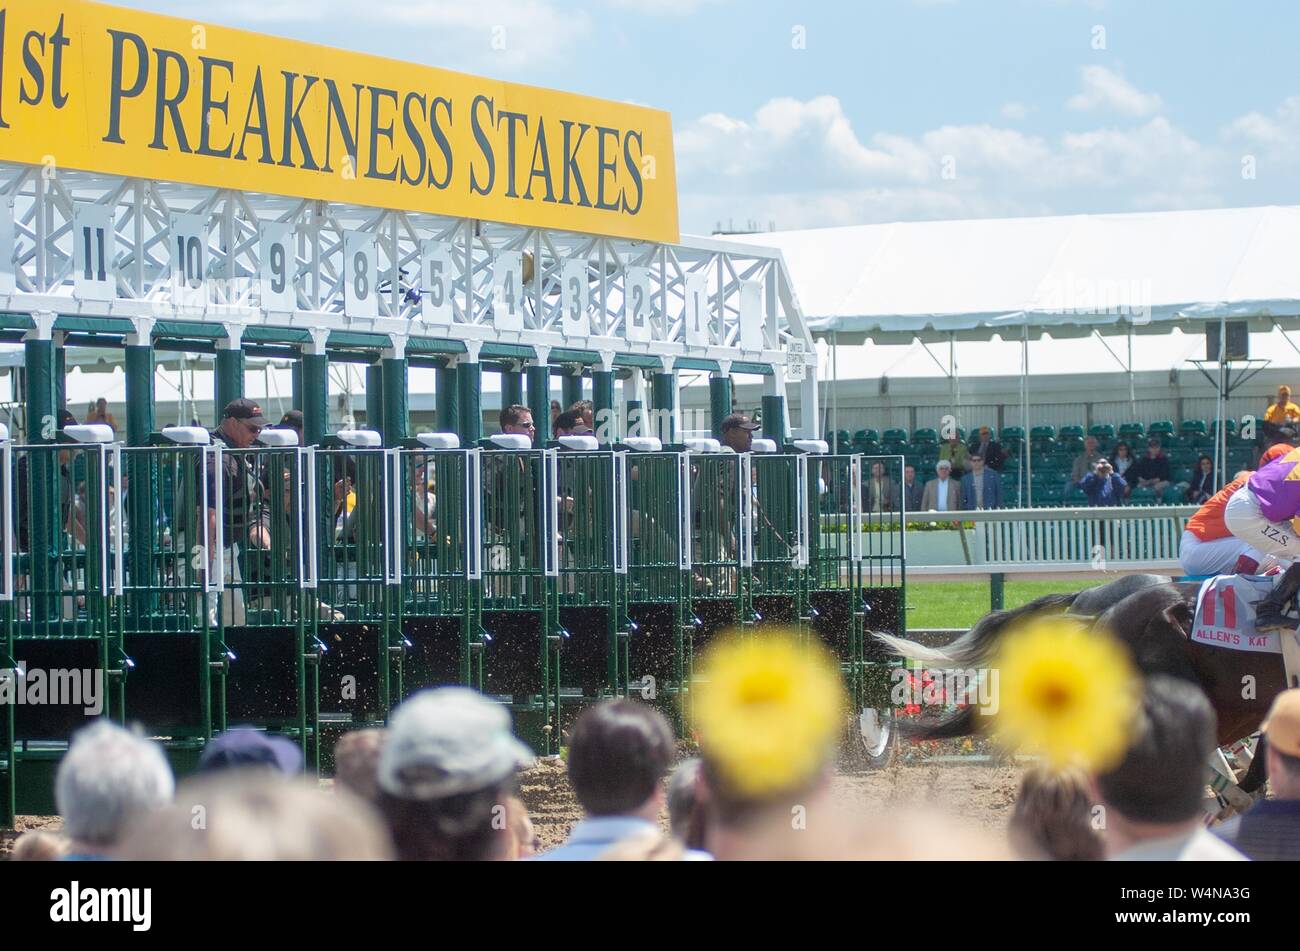 Spectators watch preparations at the gate during the Preakness Stakes, on a sunny day, at the Pimlico Race Course, Baltimore, Maryland, May 20, 2006. From the Homewood Photography Collection. () Stock Photo